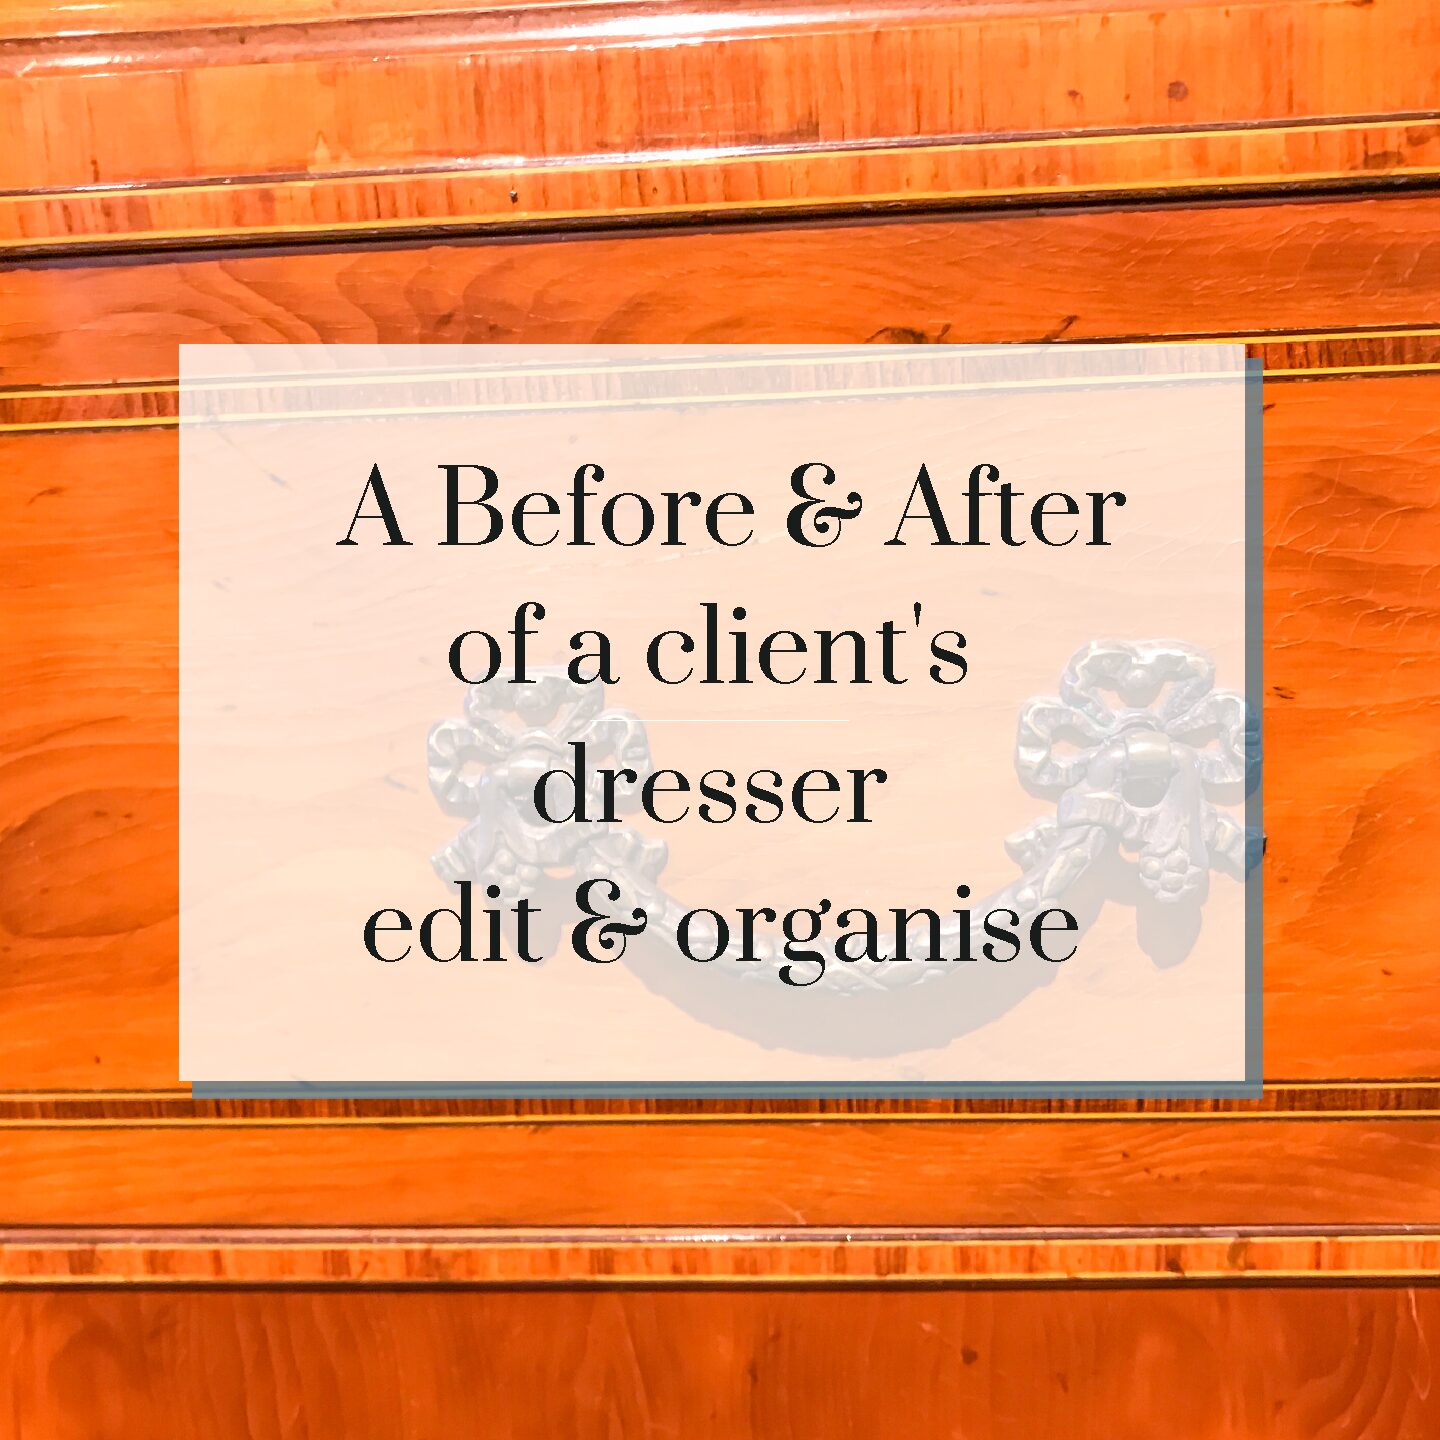 A Before & After of a client’s dresser edit & organise